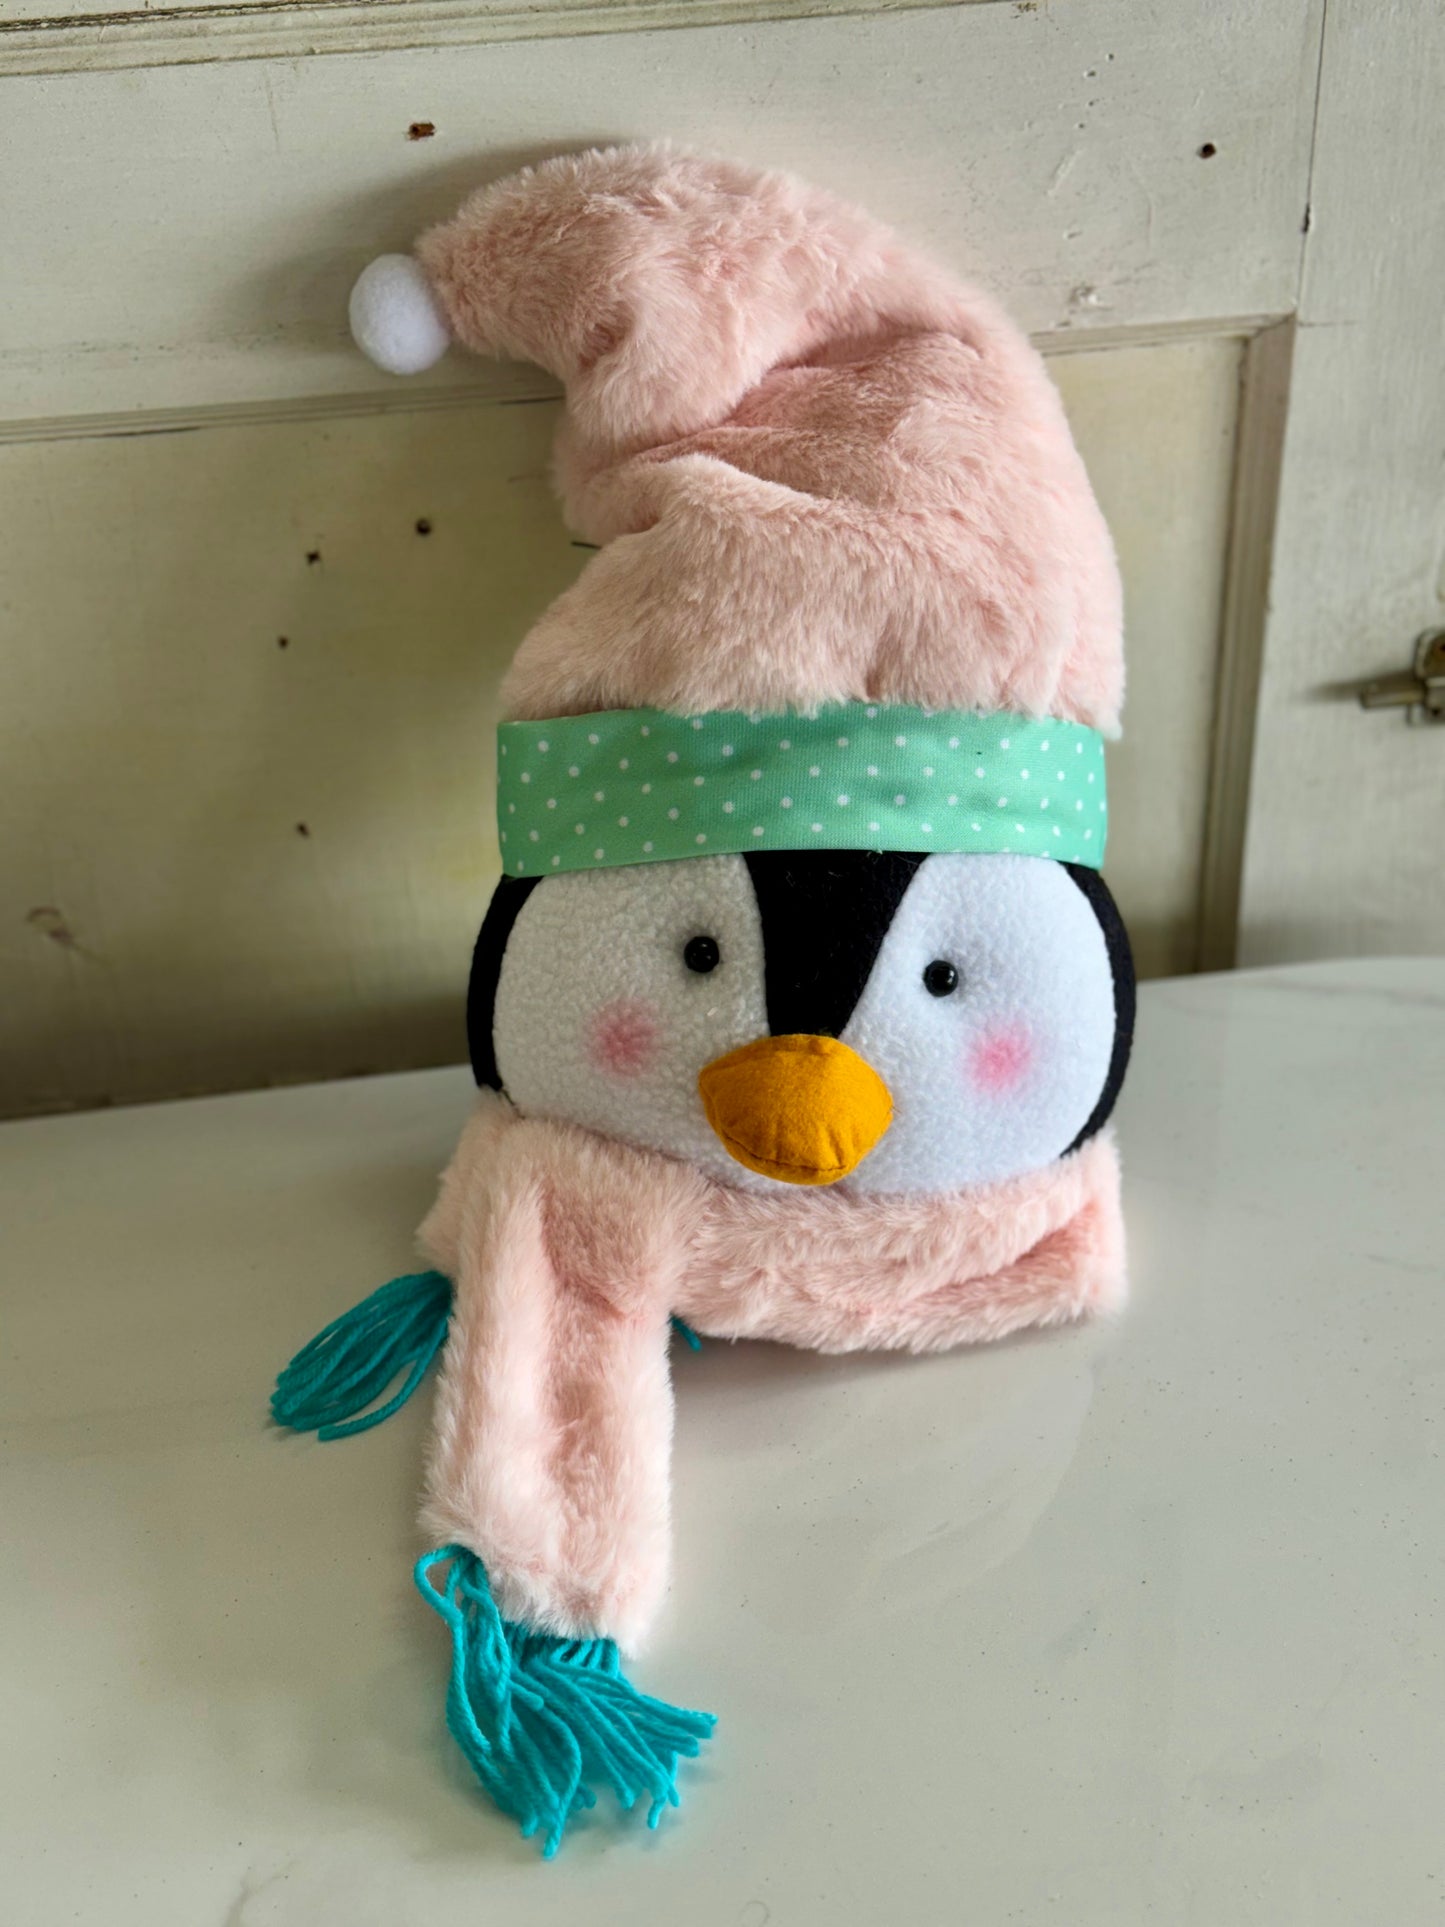 20.5 Inch Fabric Penguin Head With Scarf Wreath Attachment